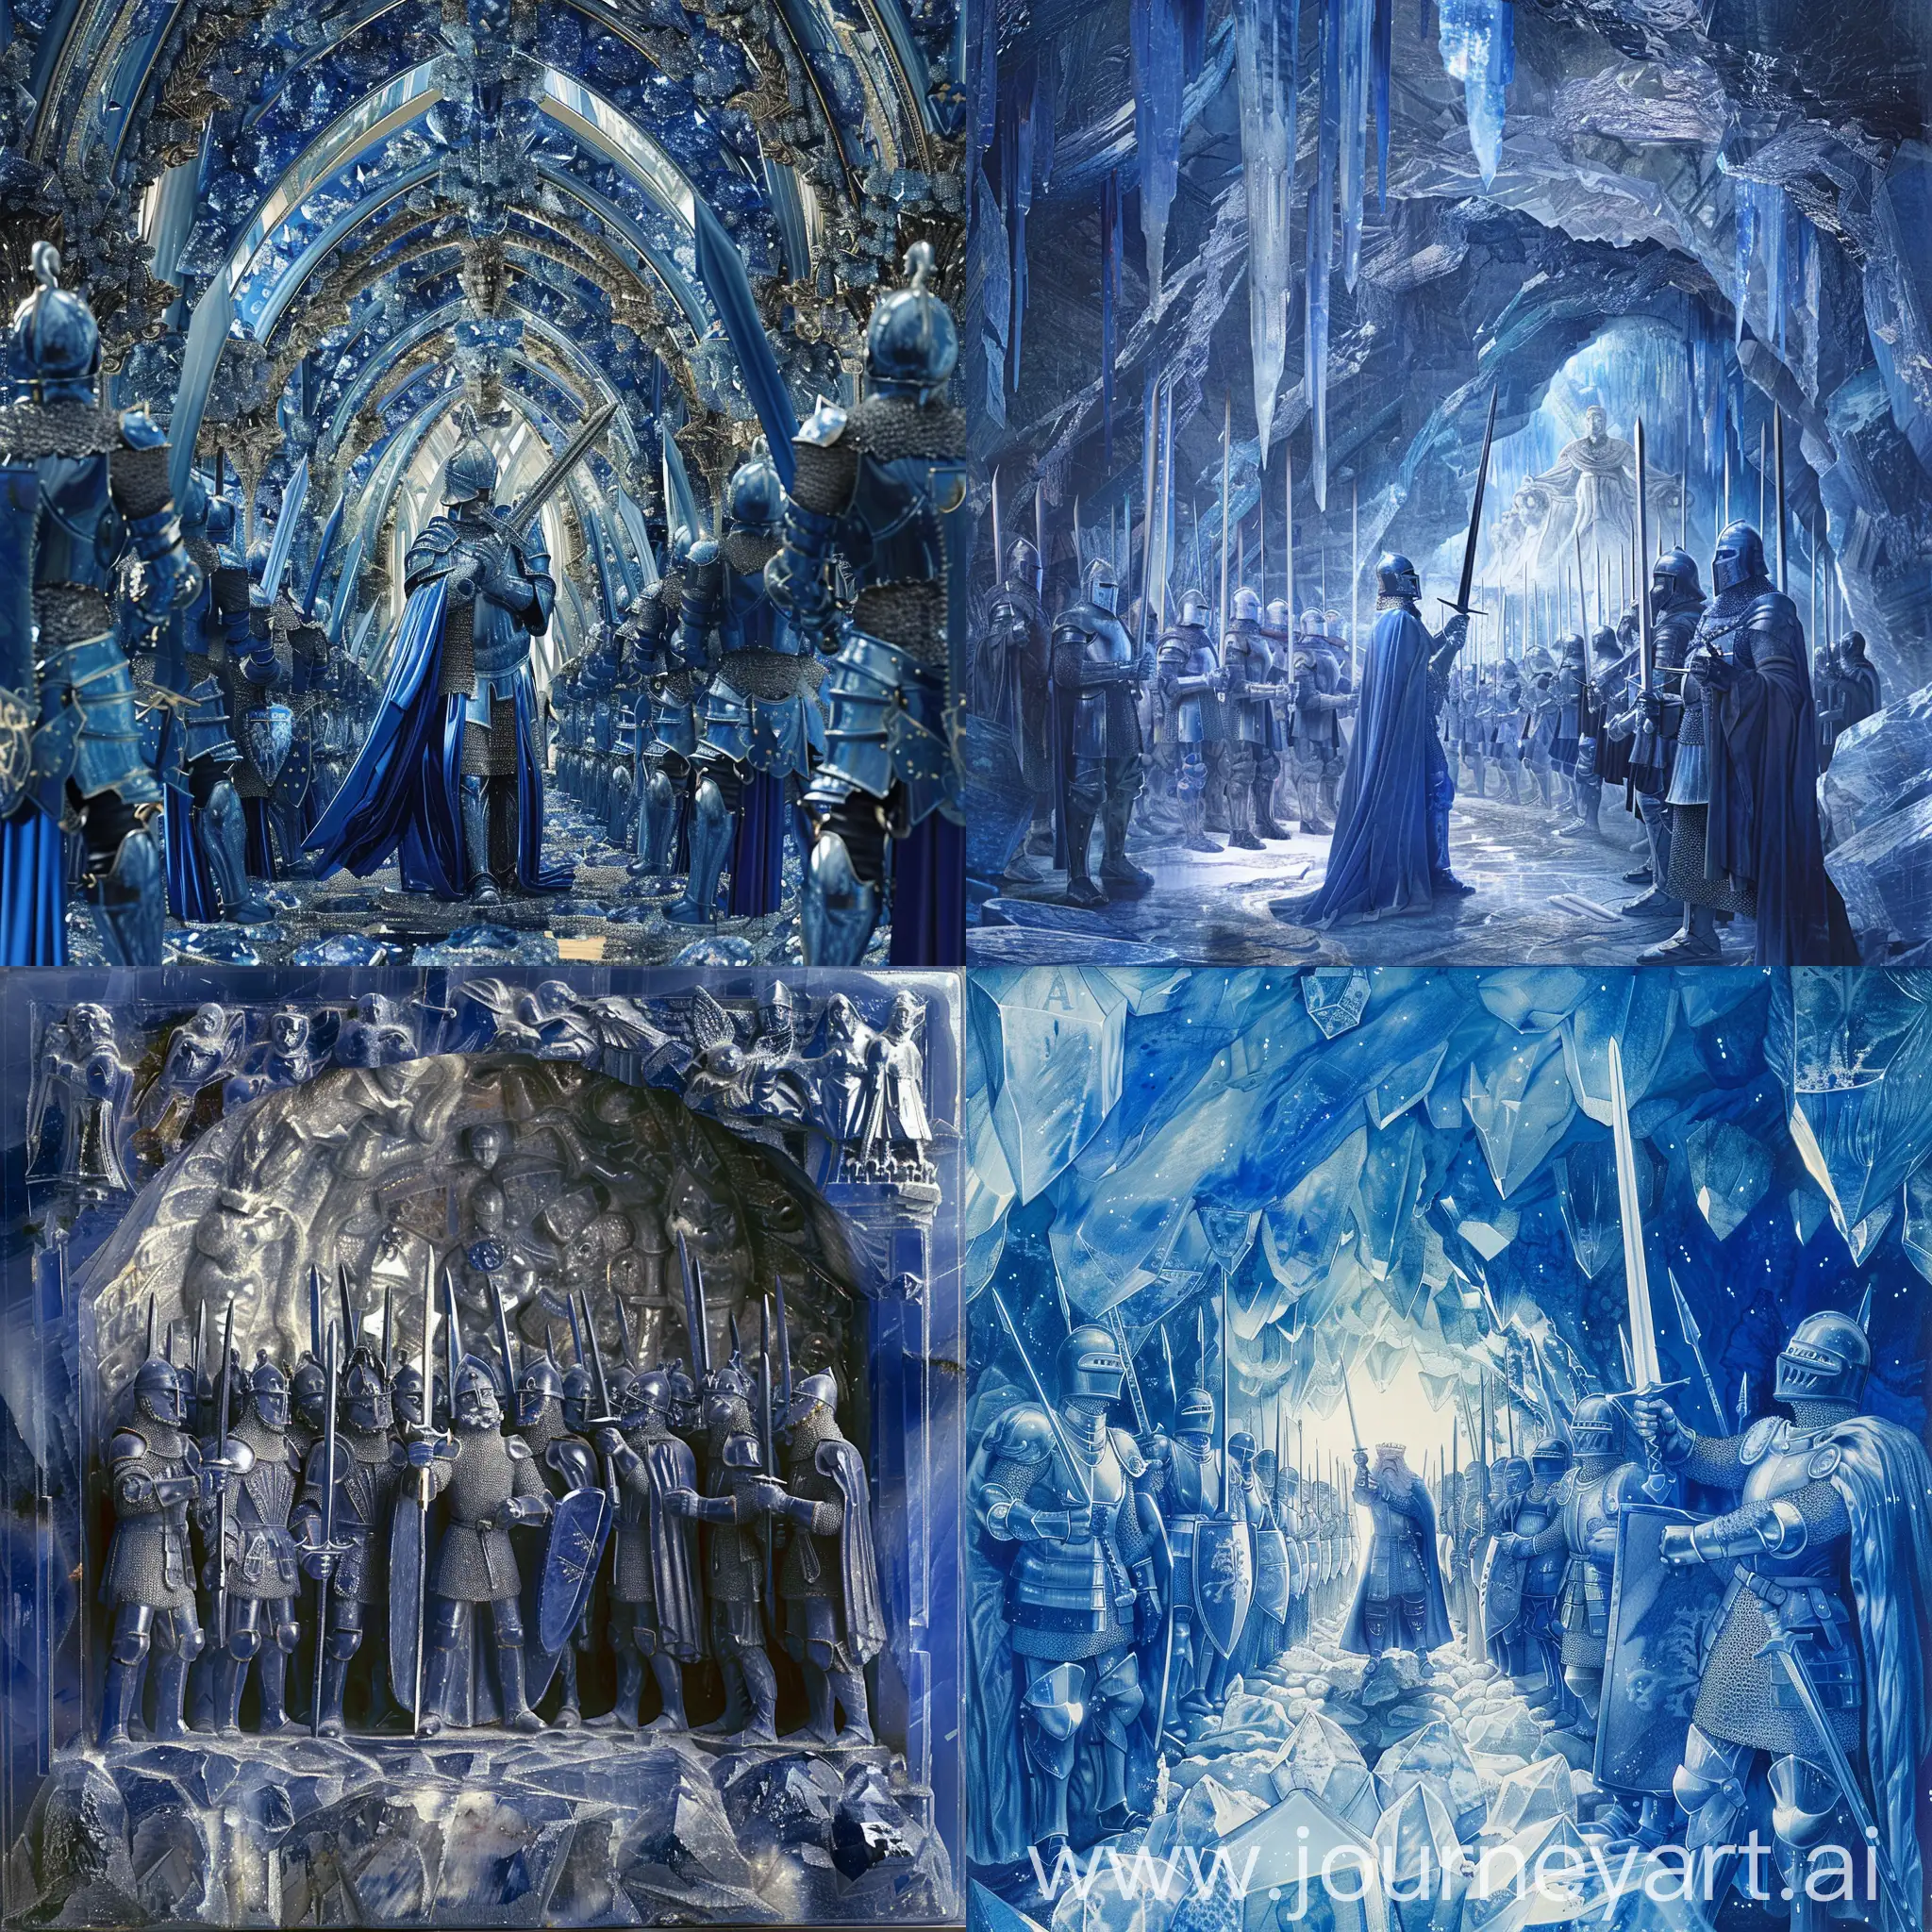 hall chamber made of sapphire with a lot of knights and king holding a sword